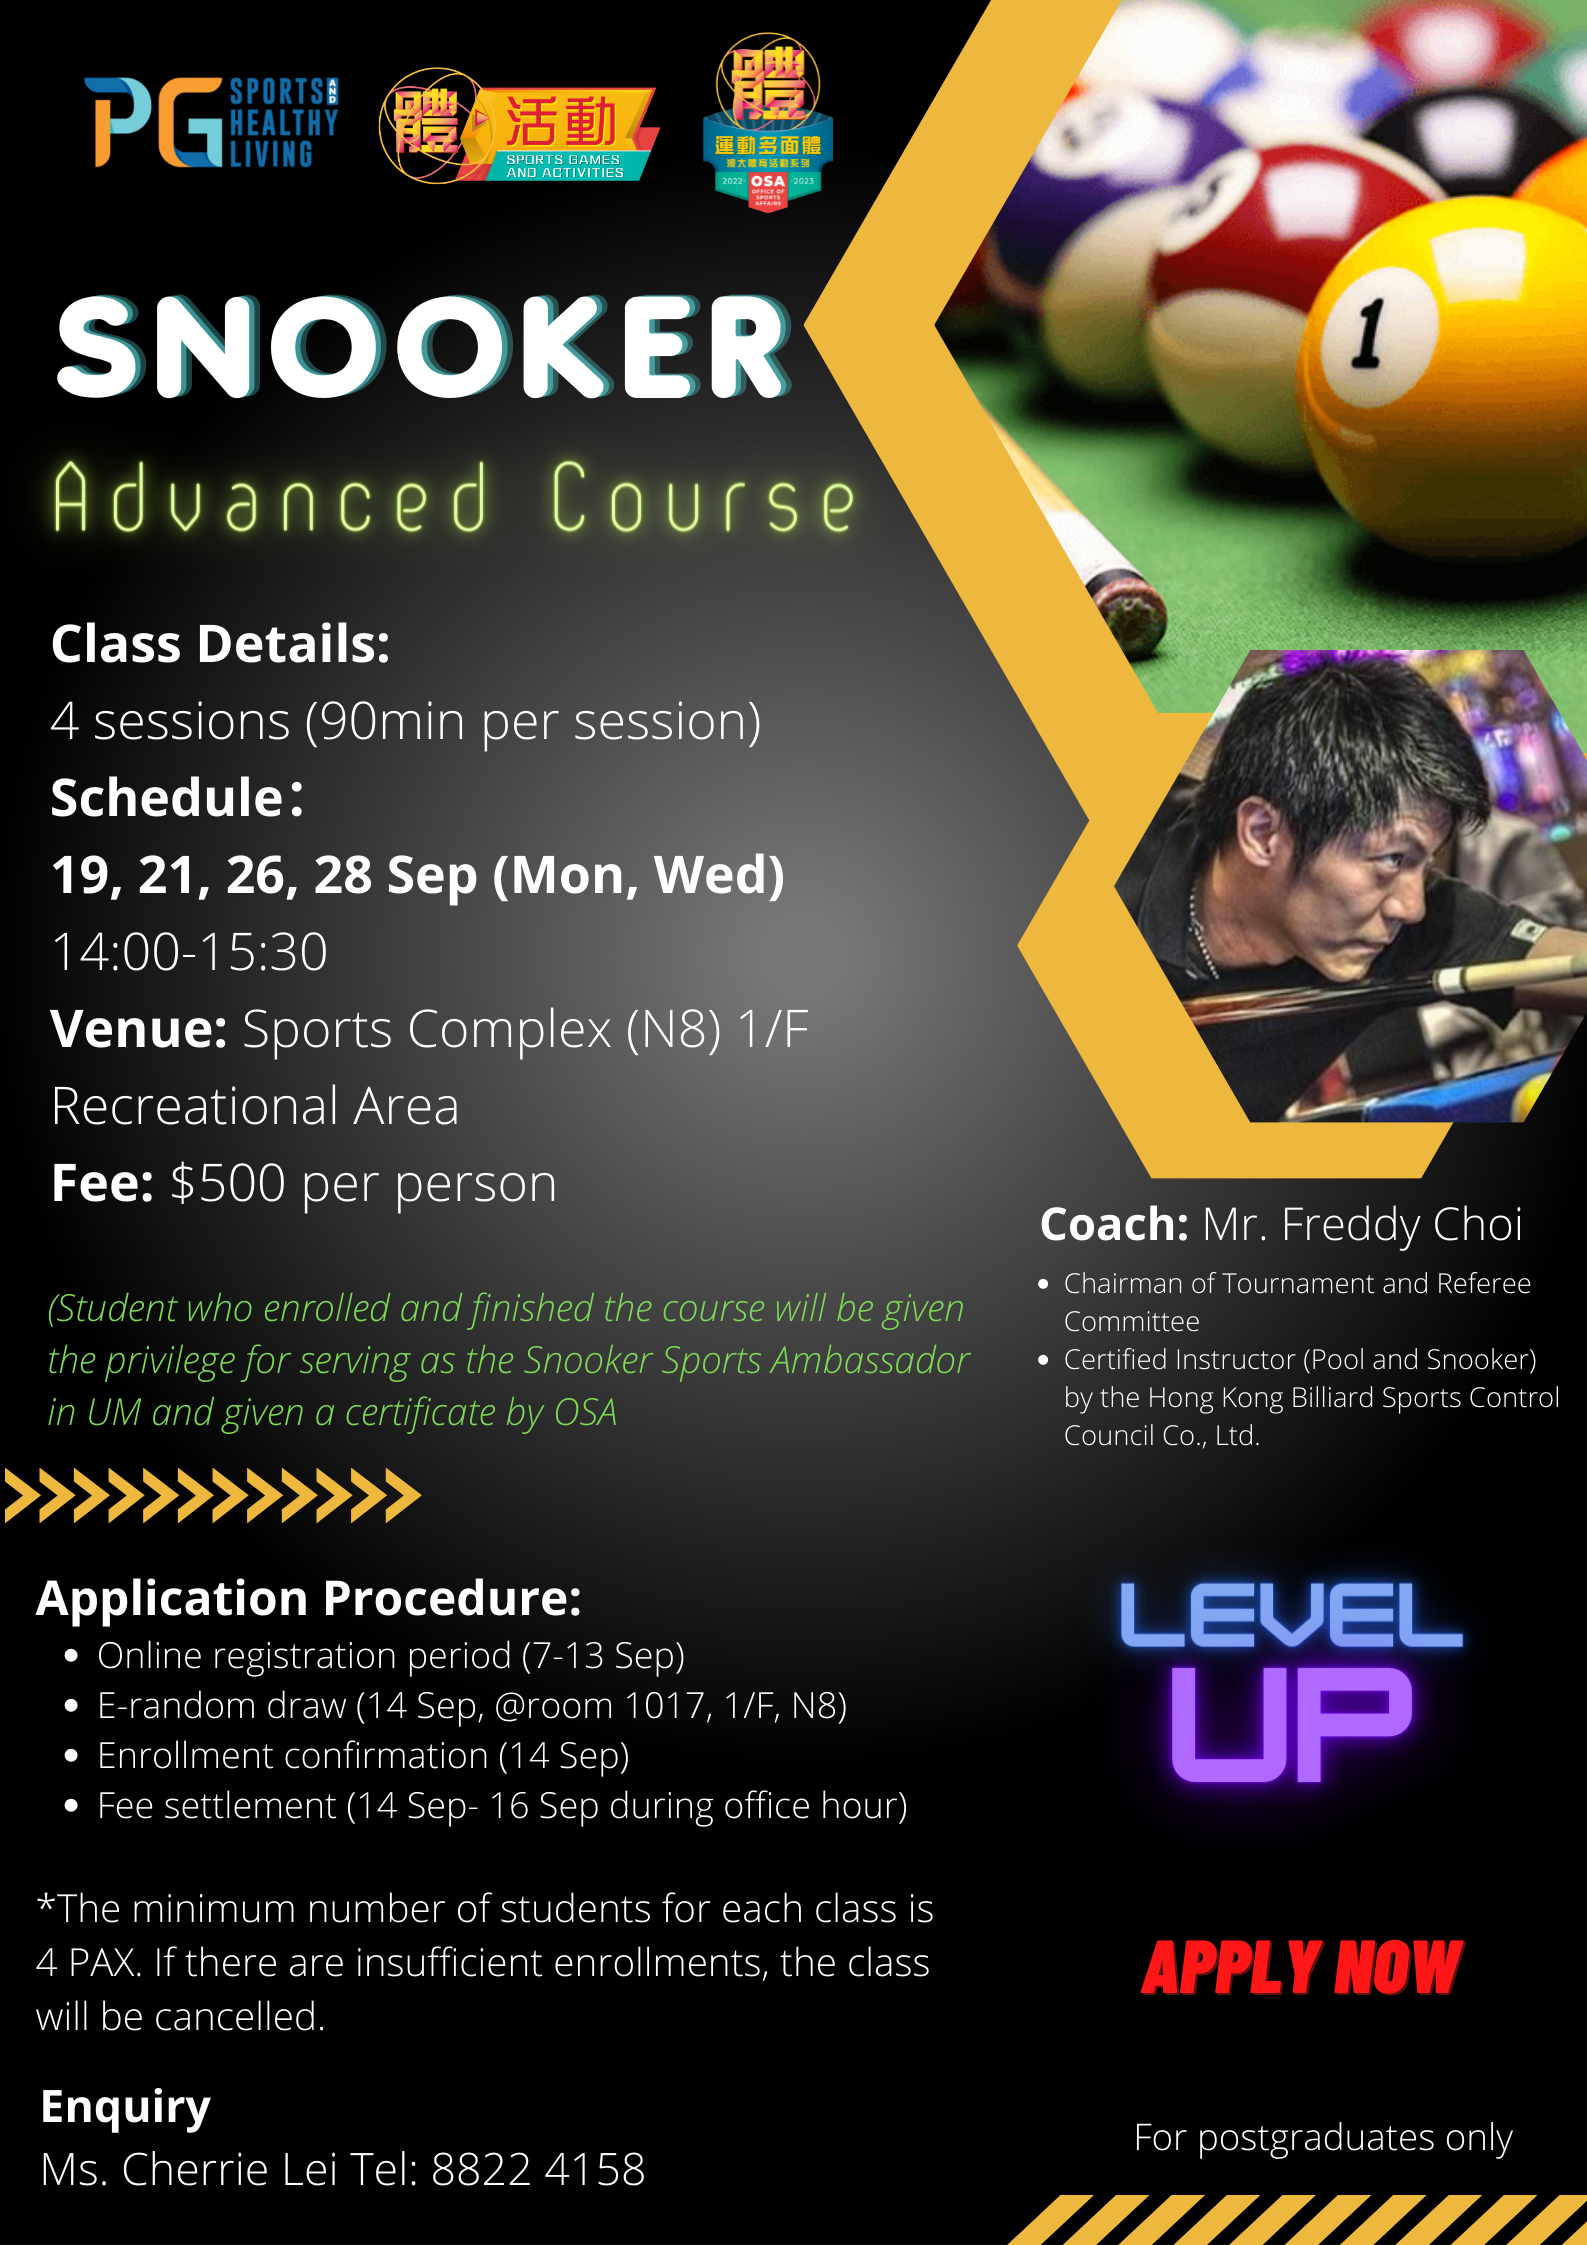 Enroll Now! American Pool and Snooker Advanced Courses (For postgraduate students only, application ends on 13 Sept)